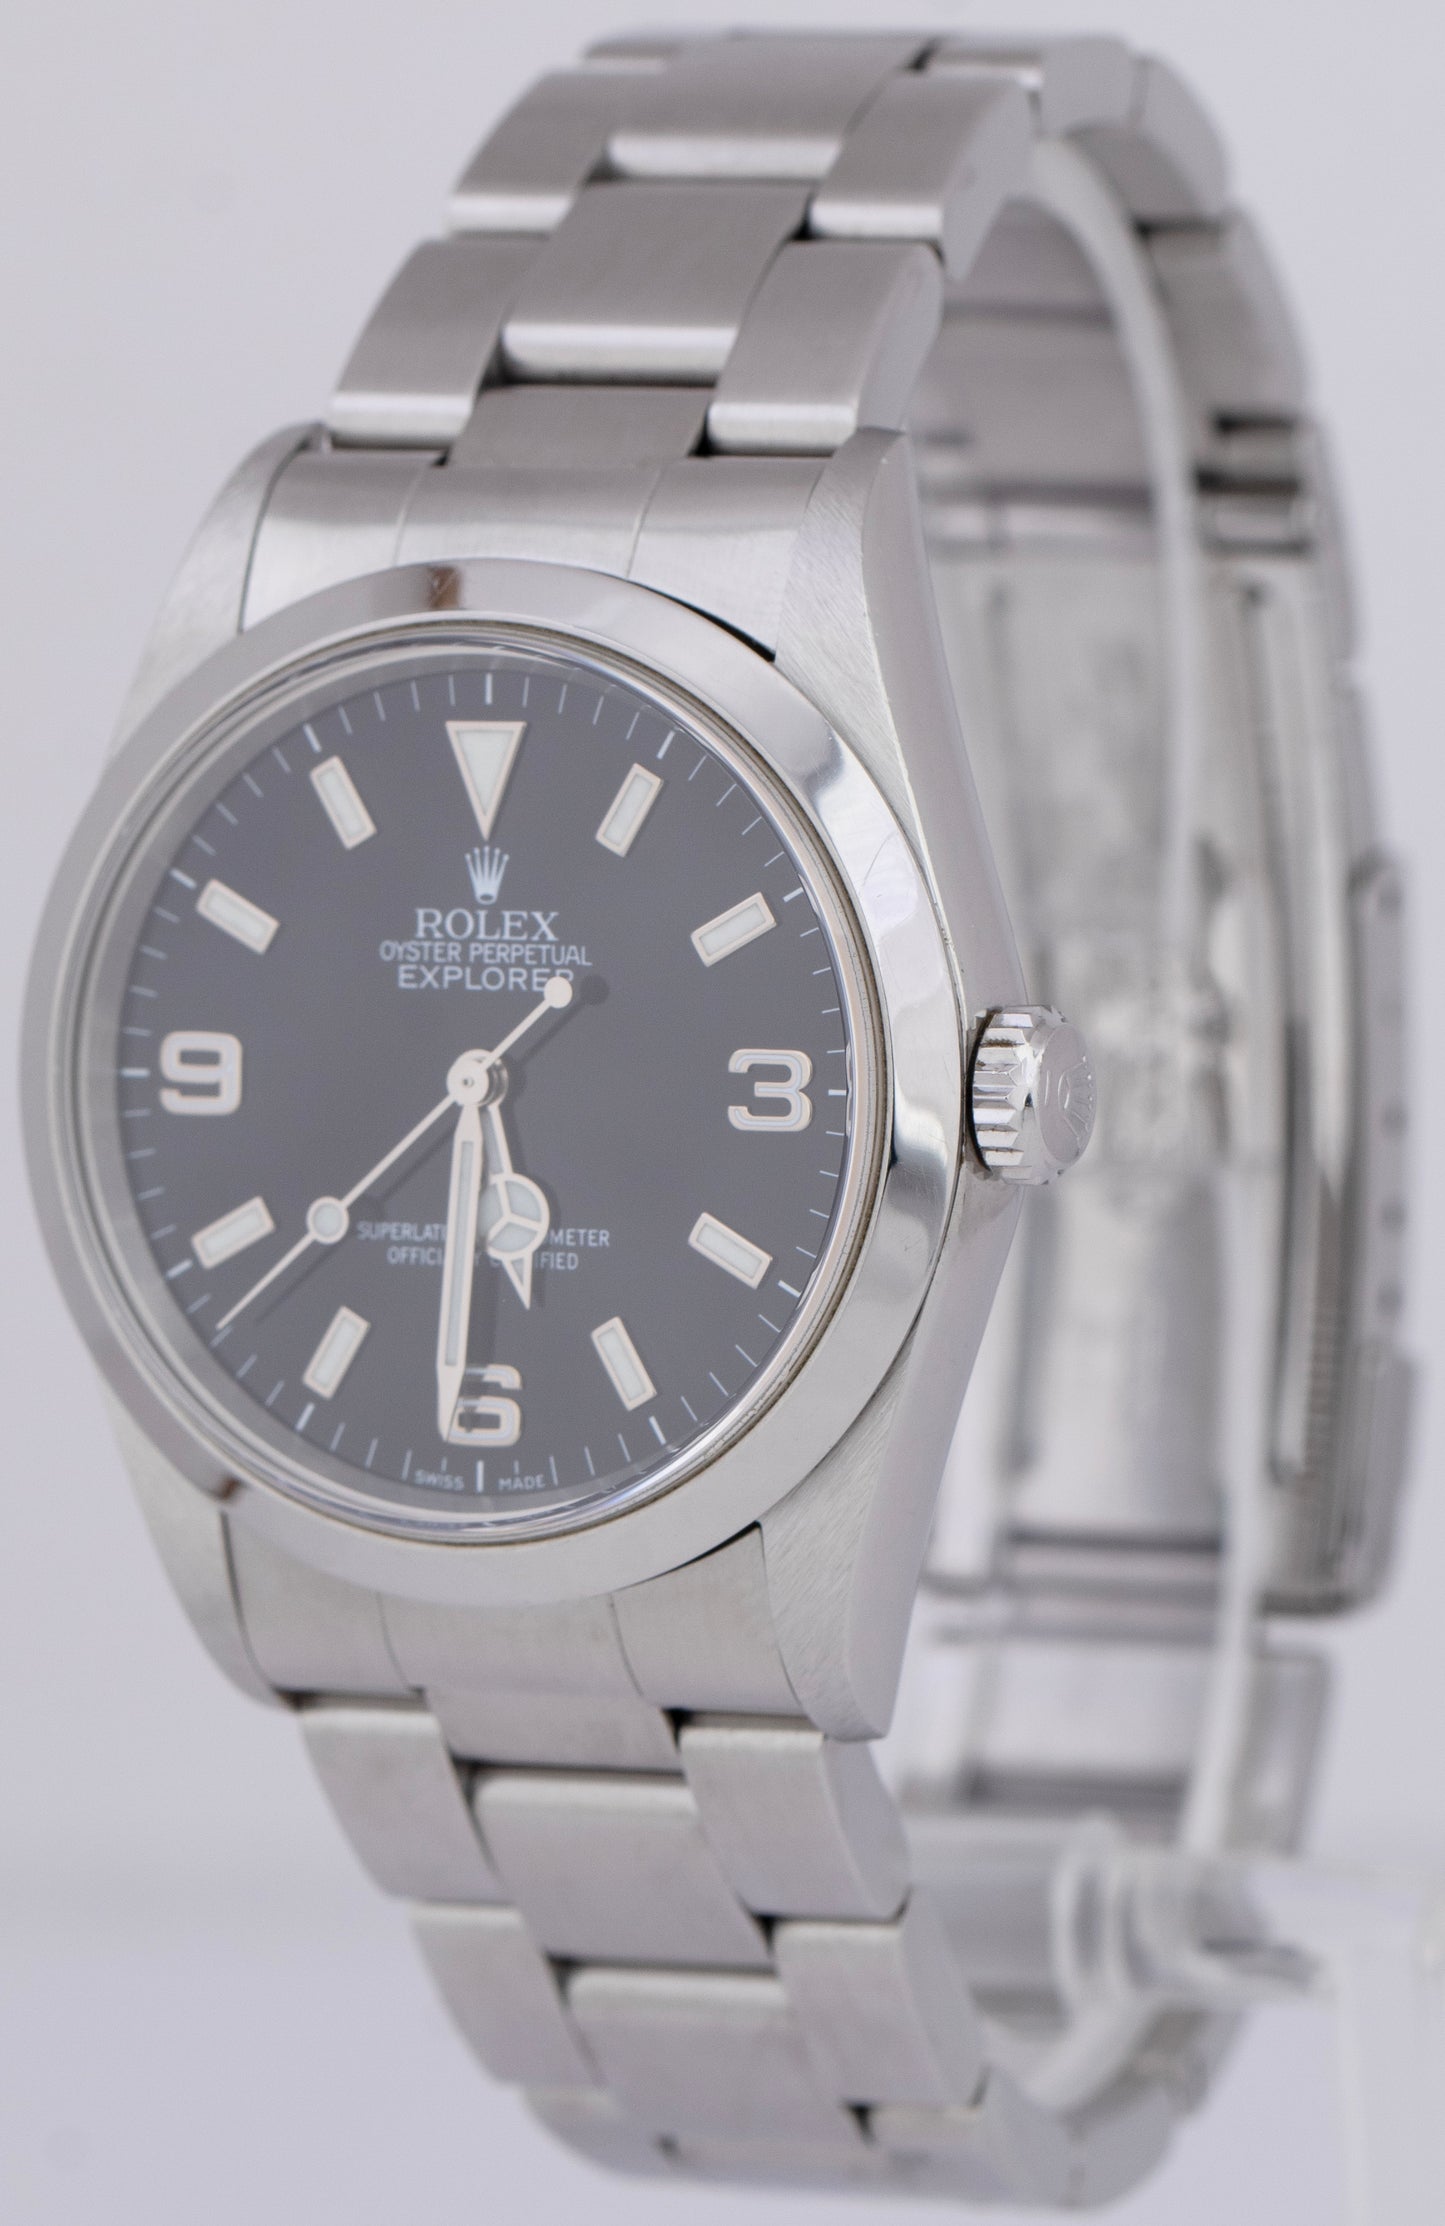 UNPOL. Rolex Explorer I Black 36mm Automatic Stainless 3-6-9 Oyster Watch 14270